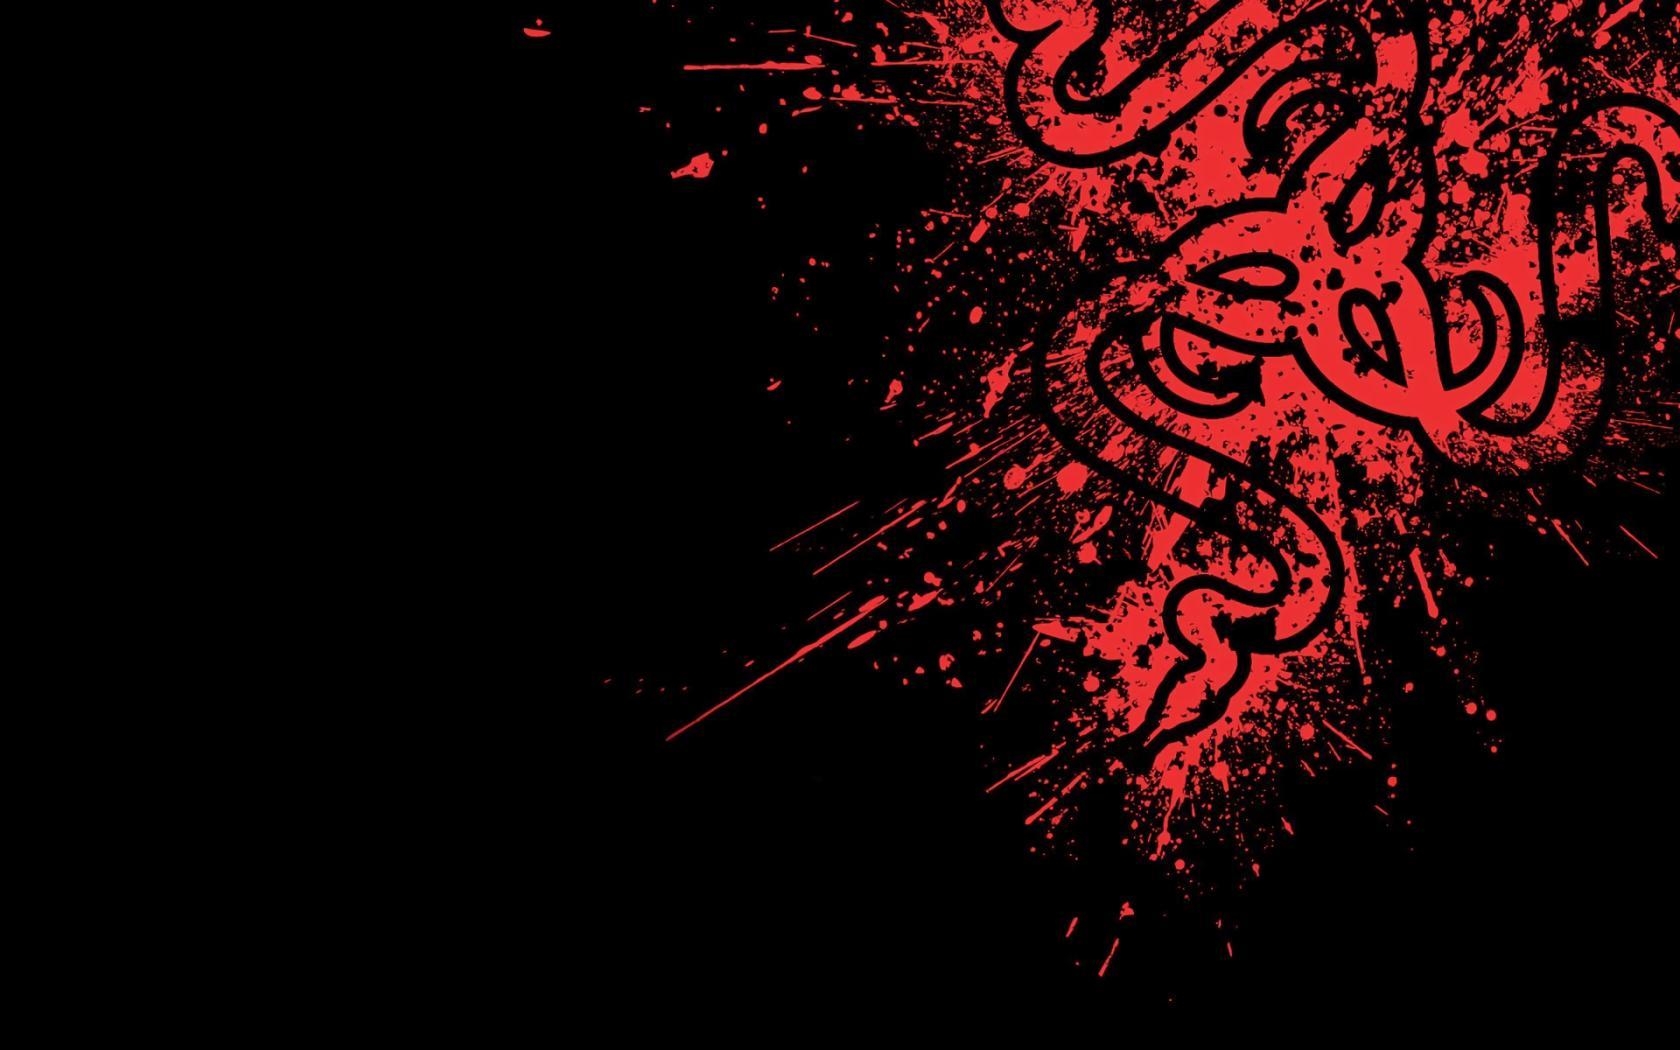 Cool Red Logo - Cool Red And Black Wallpaper Of Razer's Logo | PaperPull